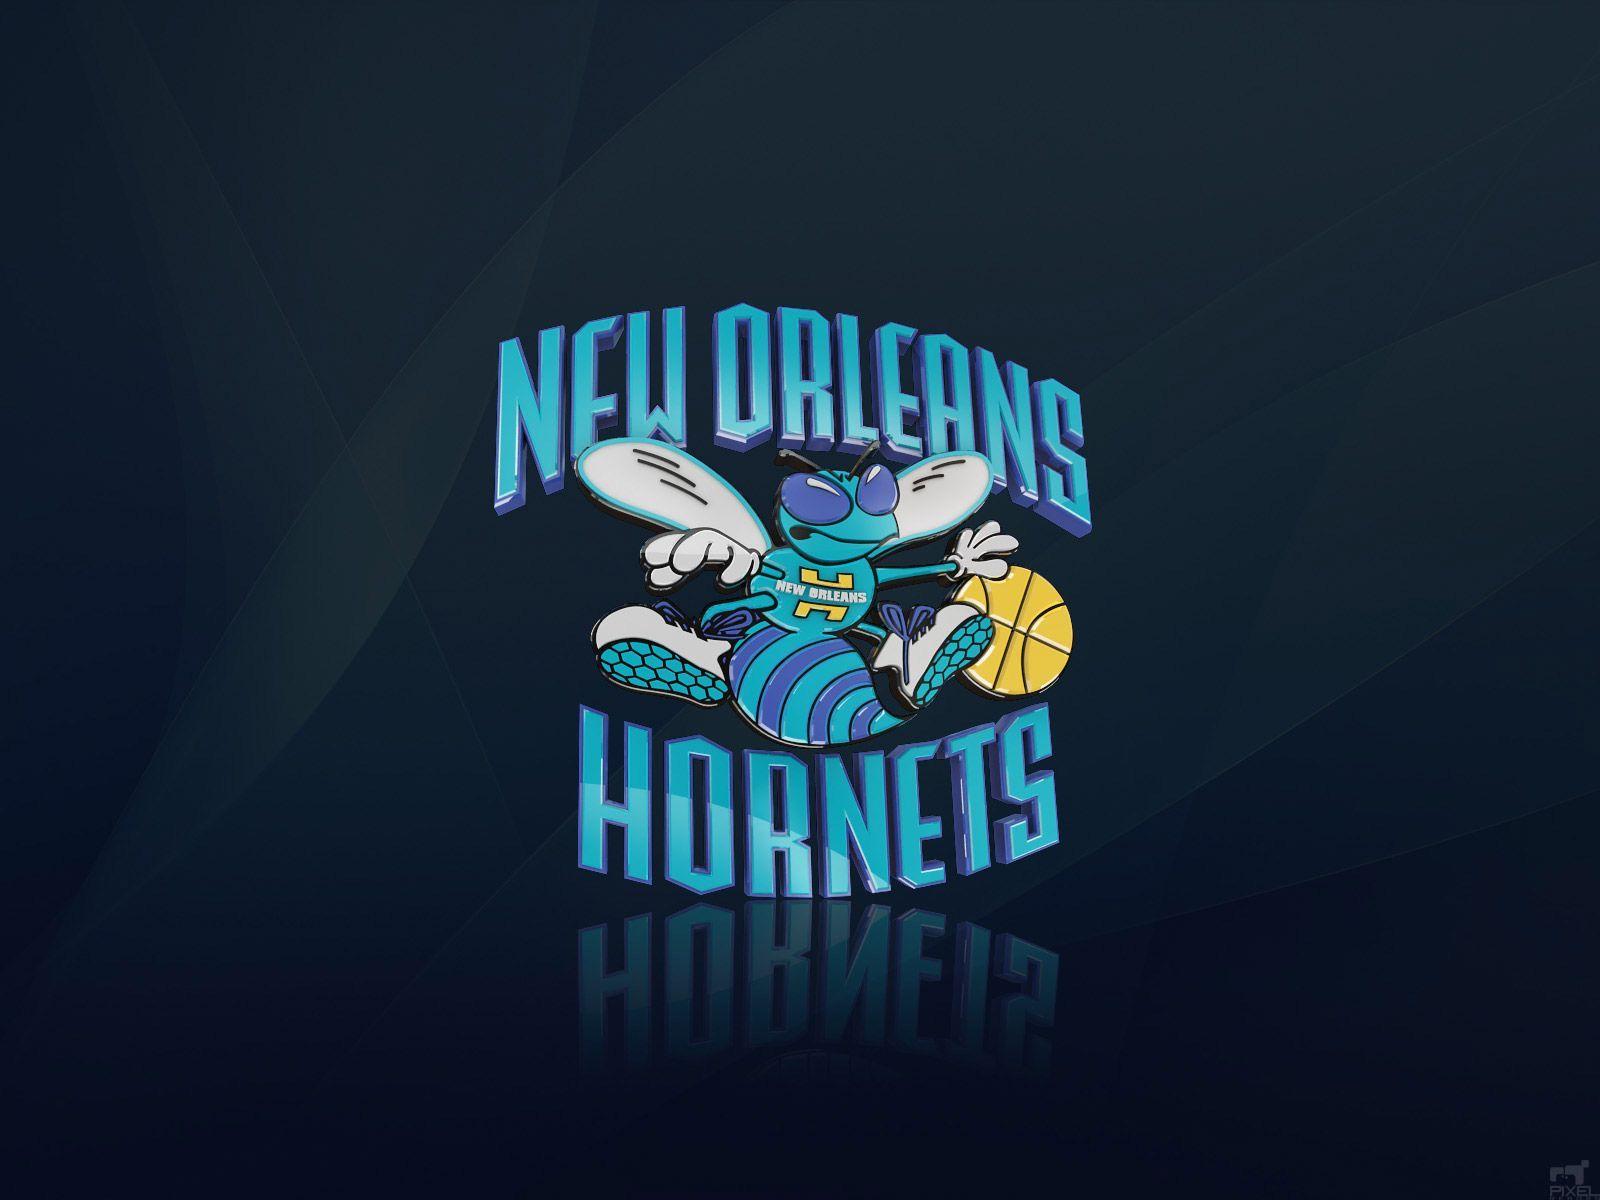 Made some Grungy NBA Team iPhone Wallpapers  rnba